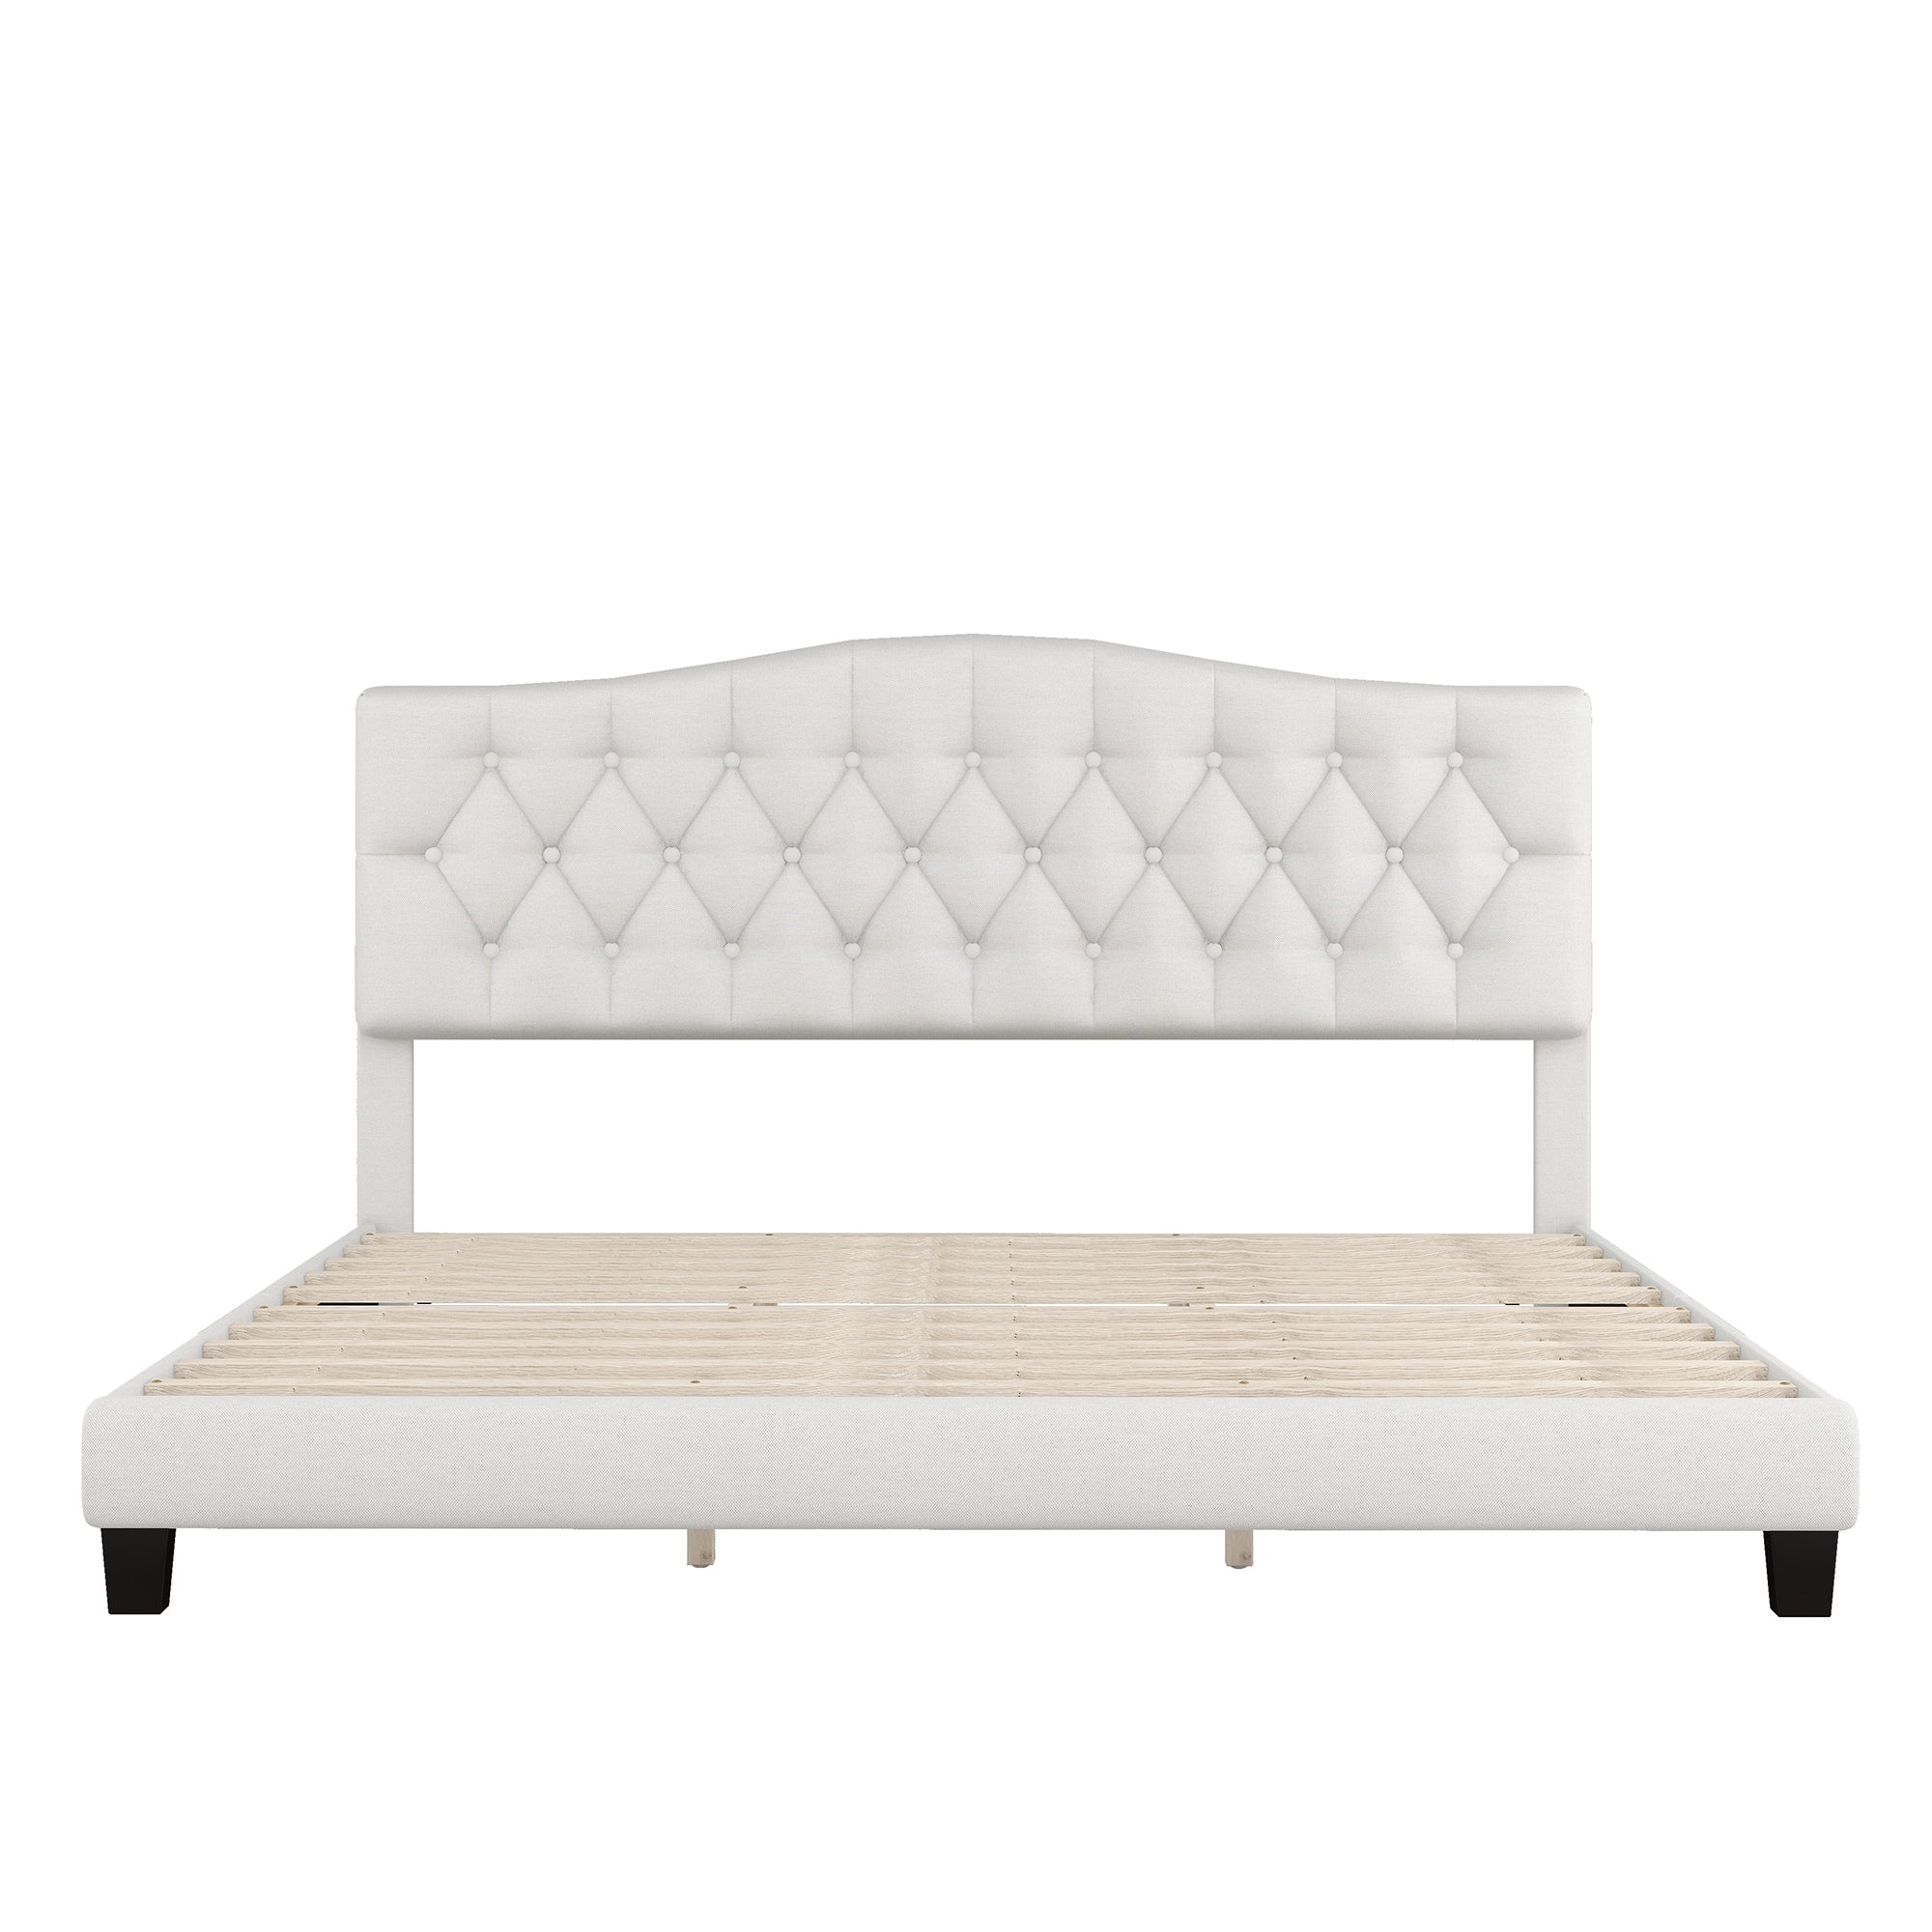 Upholstered Platform King Bed with Saddle Curved Headboard and Diamond Tufted Details - Beige